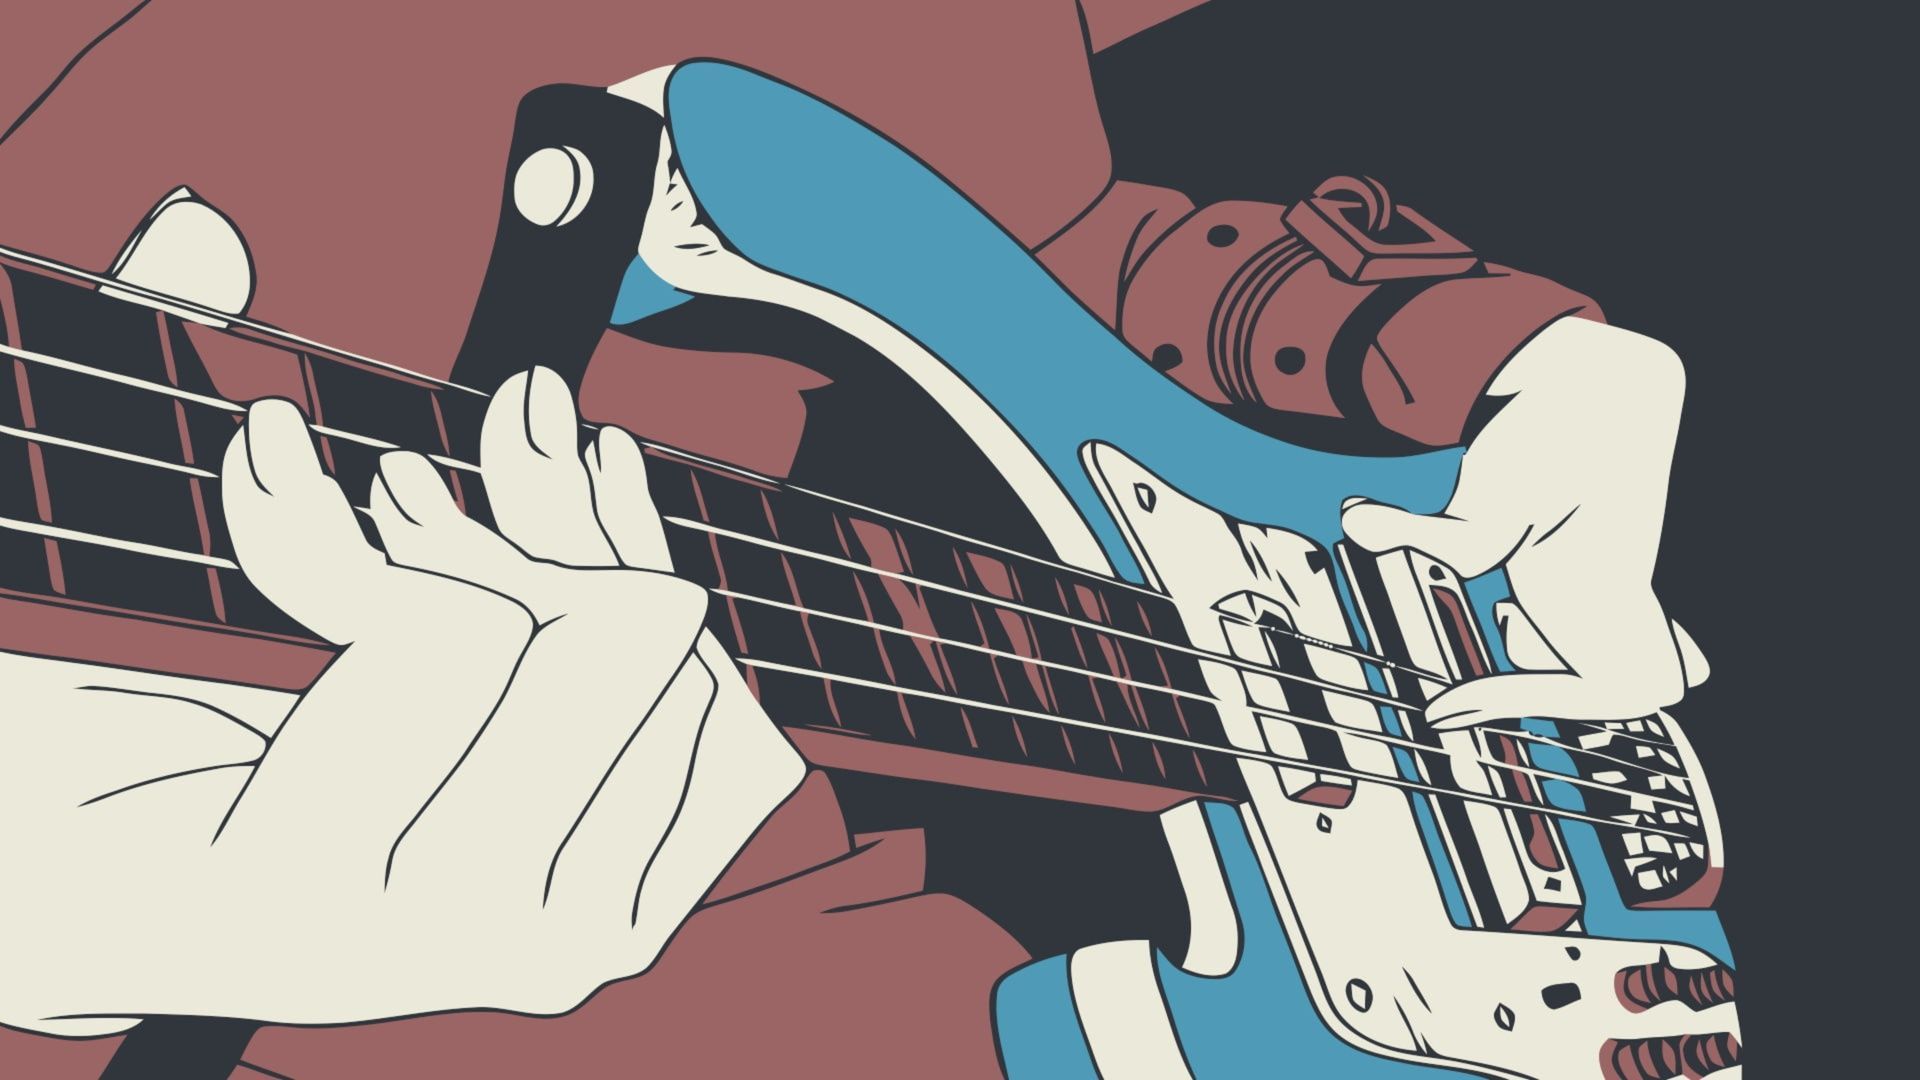 Illustration of a person playing a bass guitar - Guitar